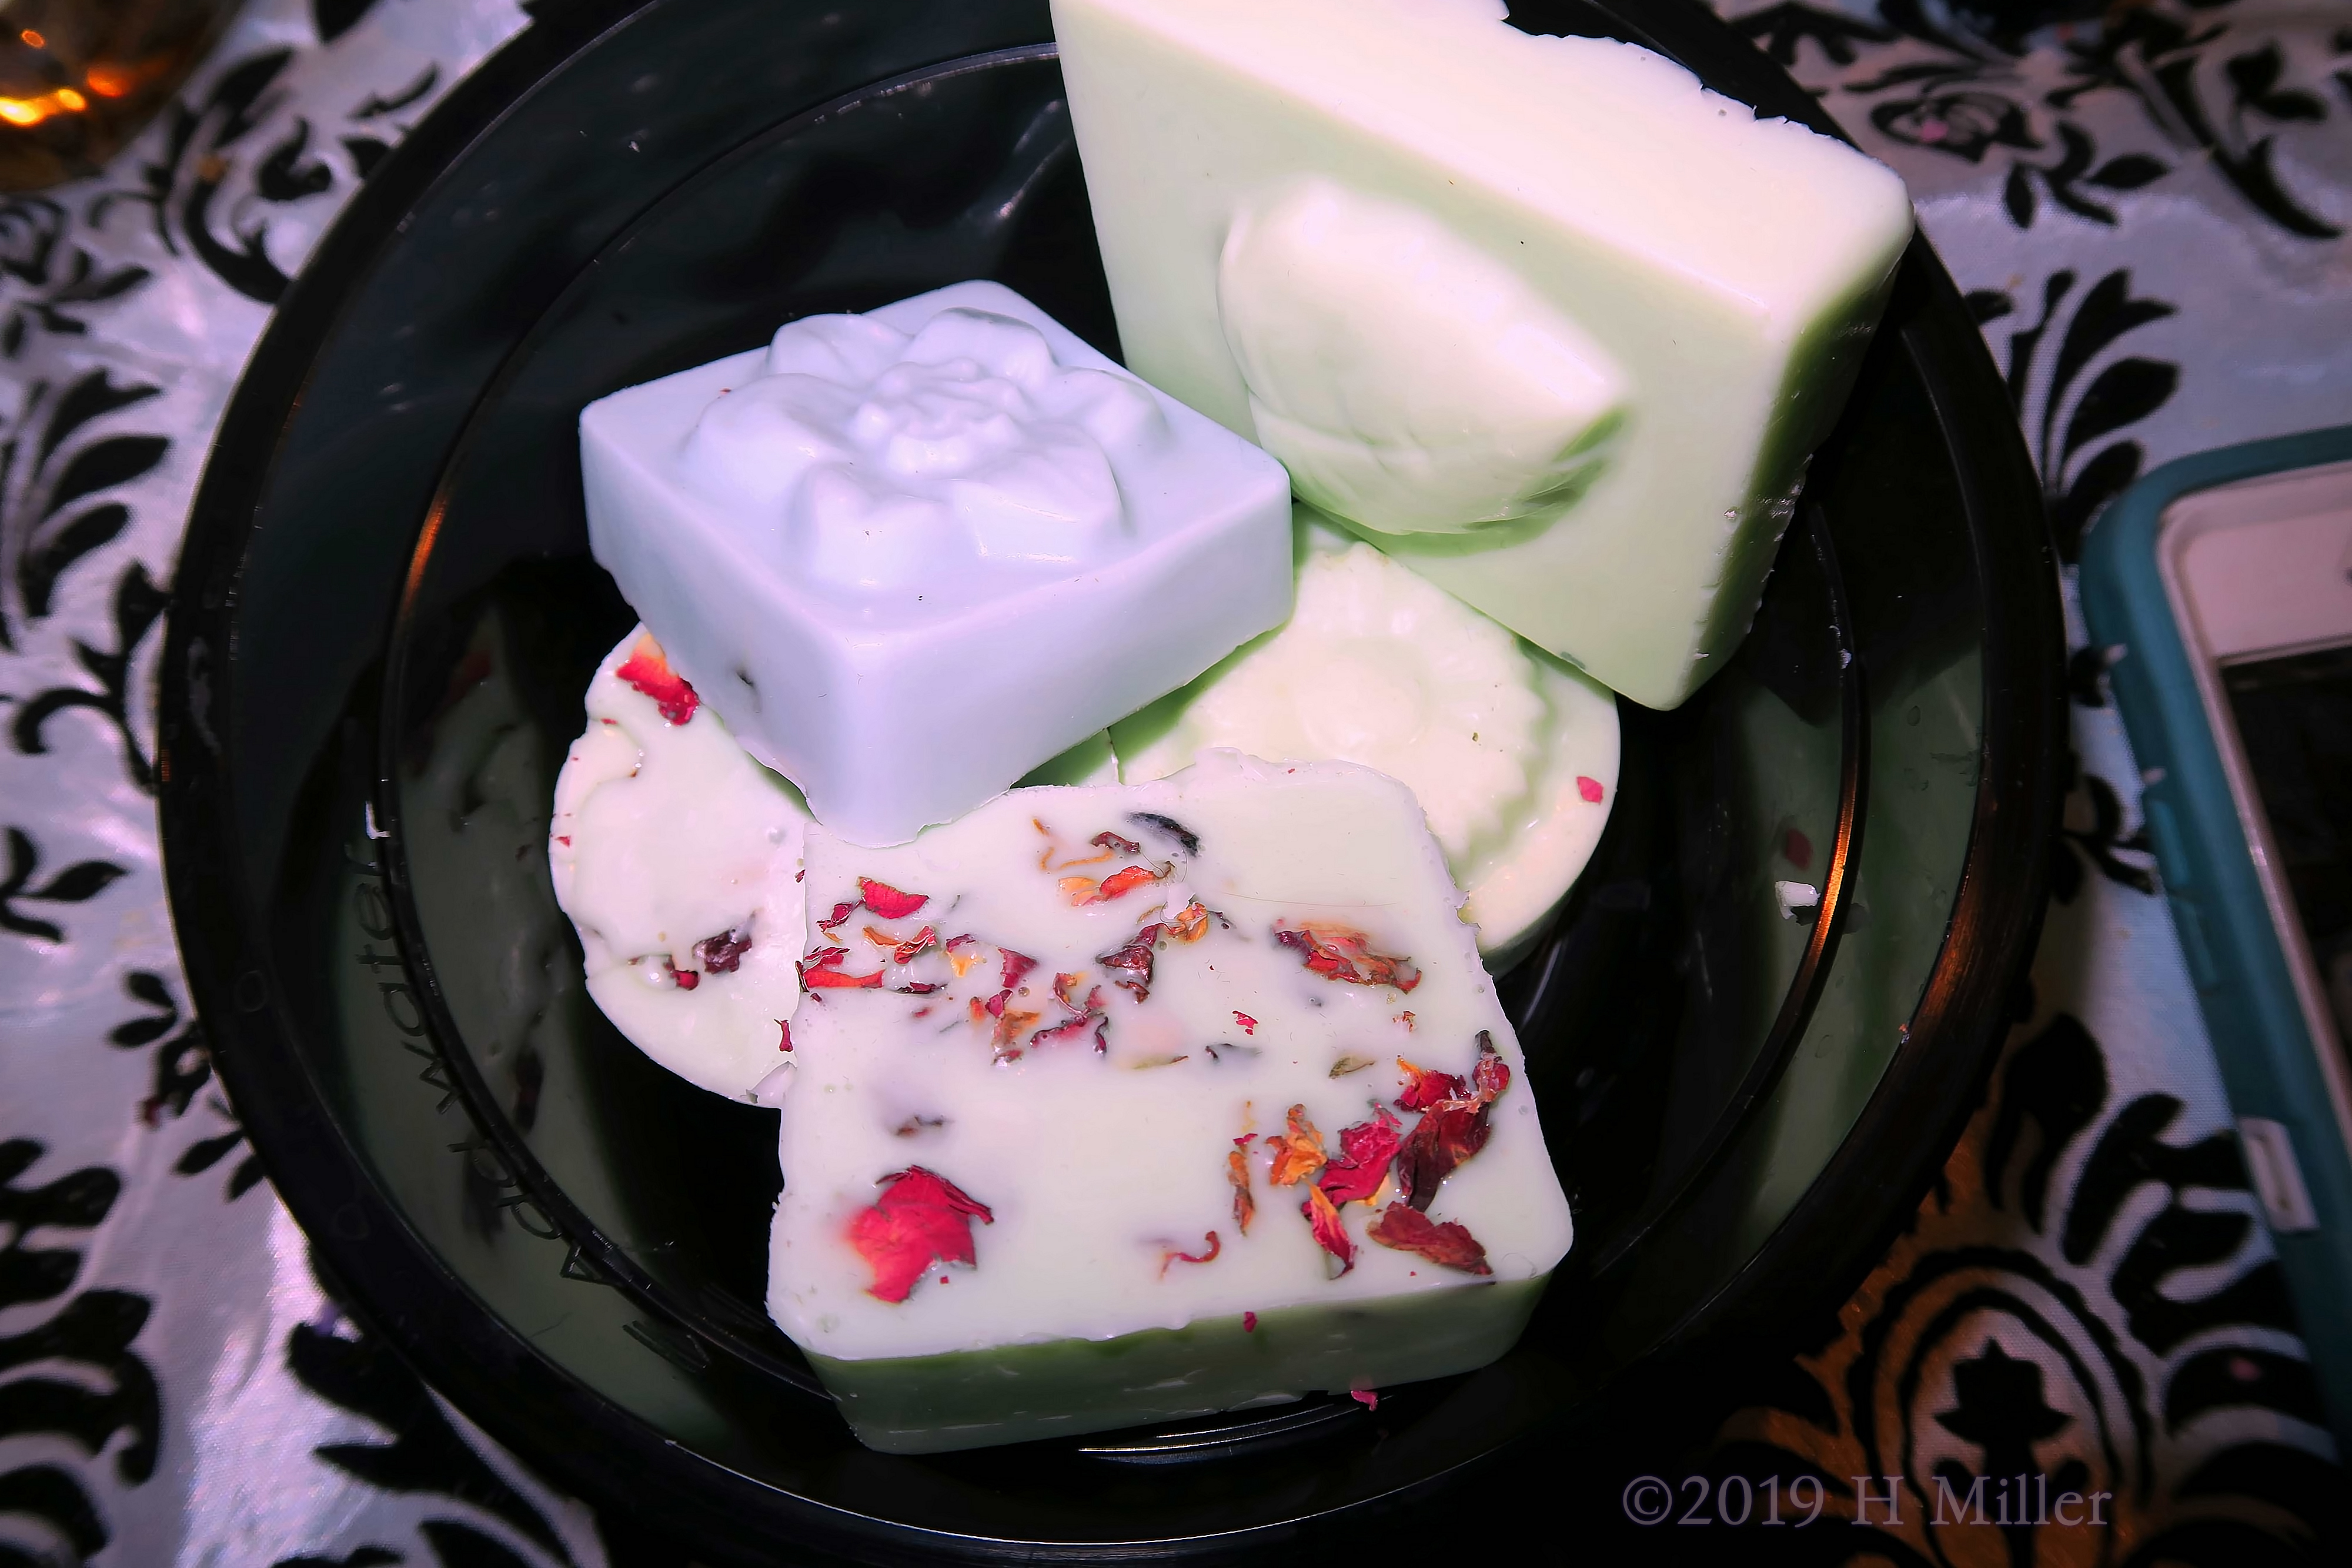 Petals For Picking! Bath Soap Kids Crafts For The Party Guests! 4